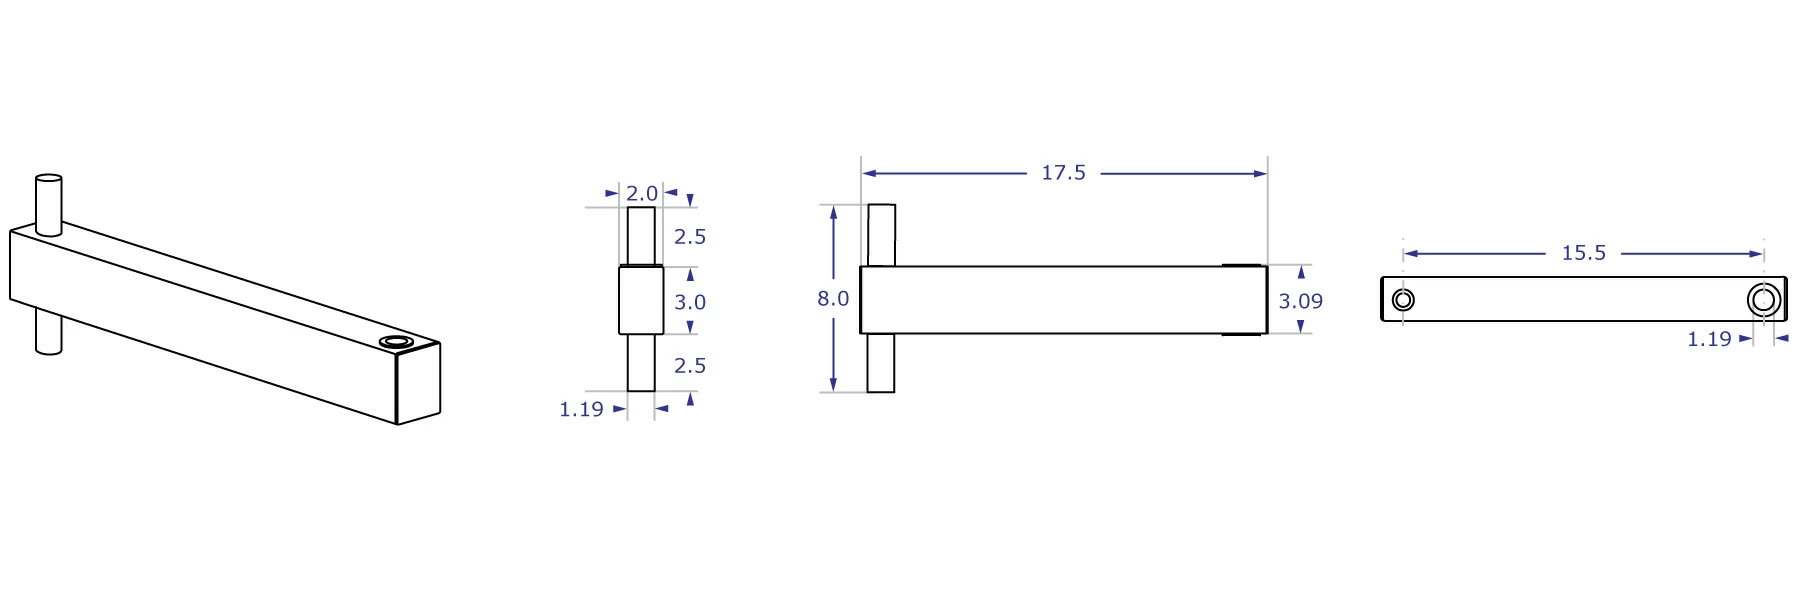 HDEXT 15.5 inch dual pin heavy-duty extension specification drawings showing measurements for front, side and top views